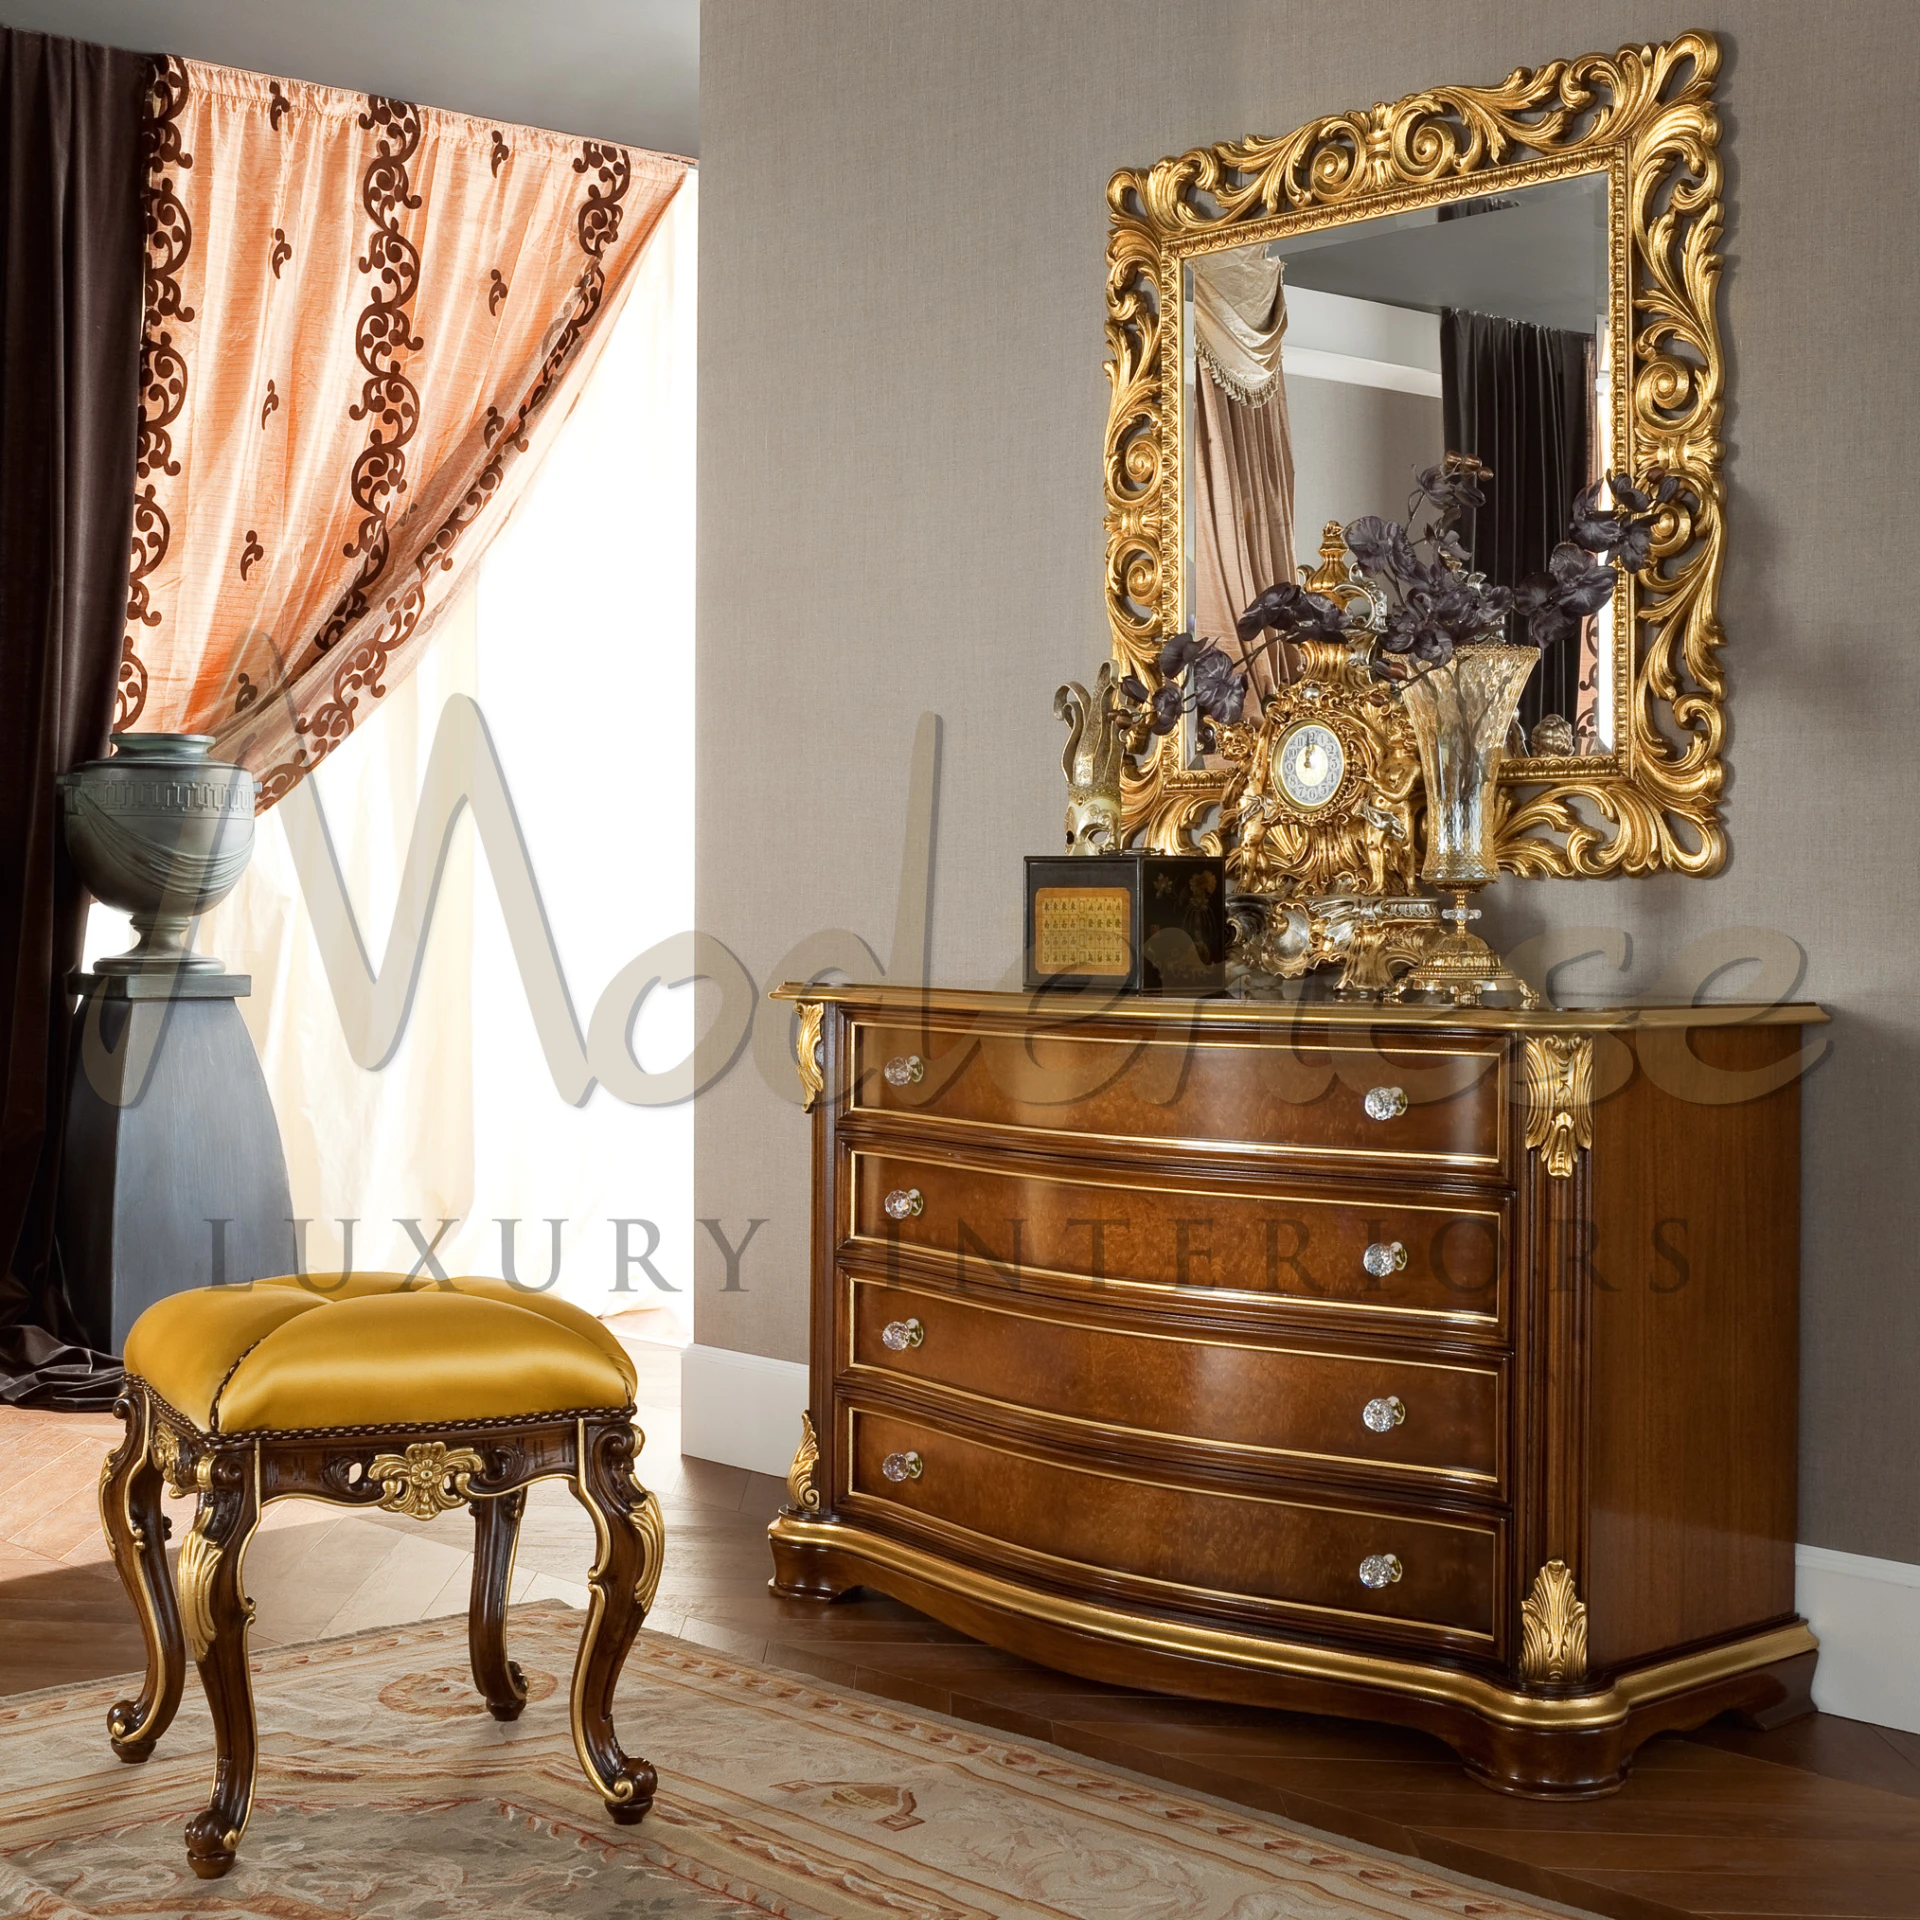 Elegant wooden dresser with sculptural gold decorations and a vintage clock on top  by Modenese                                                               